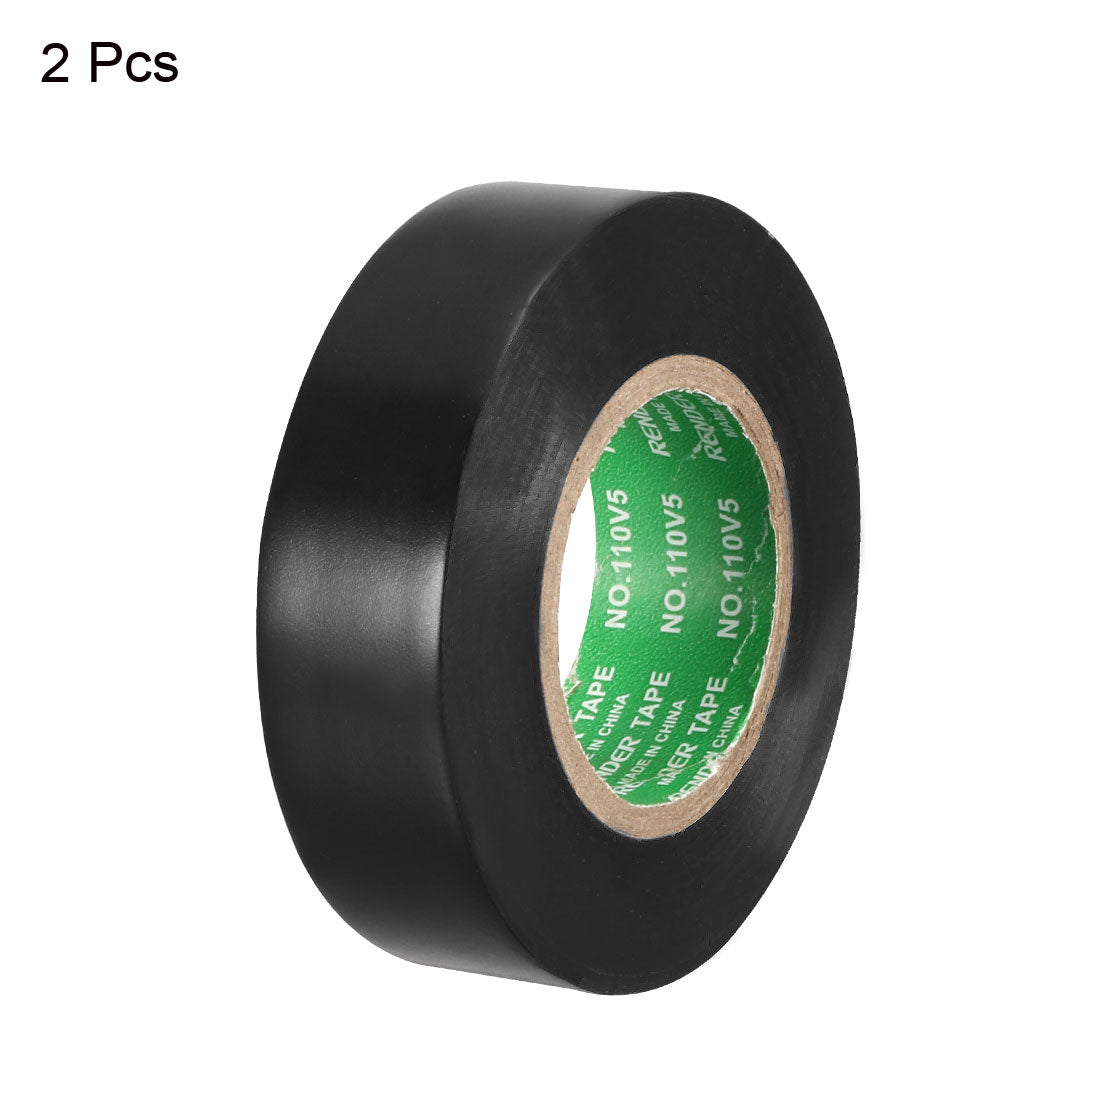 uxcell Uxcell Insulating Tape 18mm x20M x 0.1mm  PVC Electrical Tape Max. 600V Black 2pcs